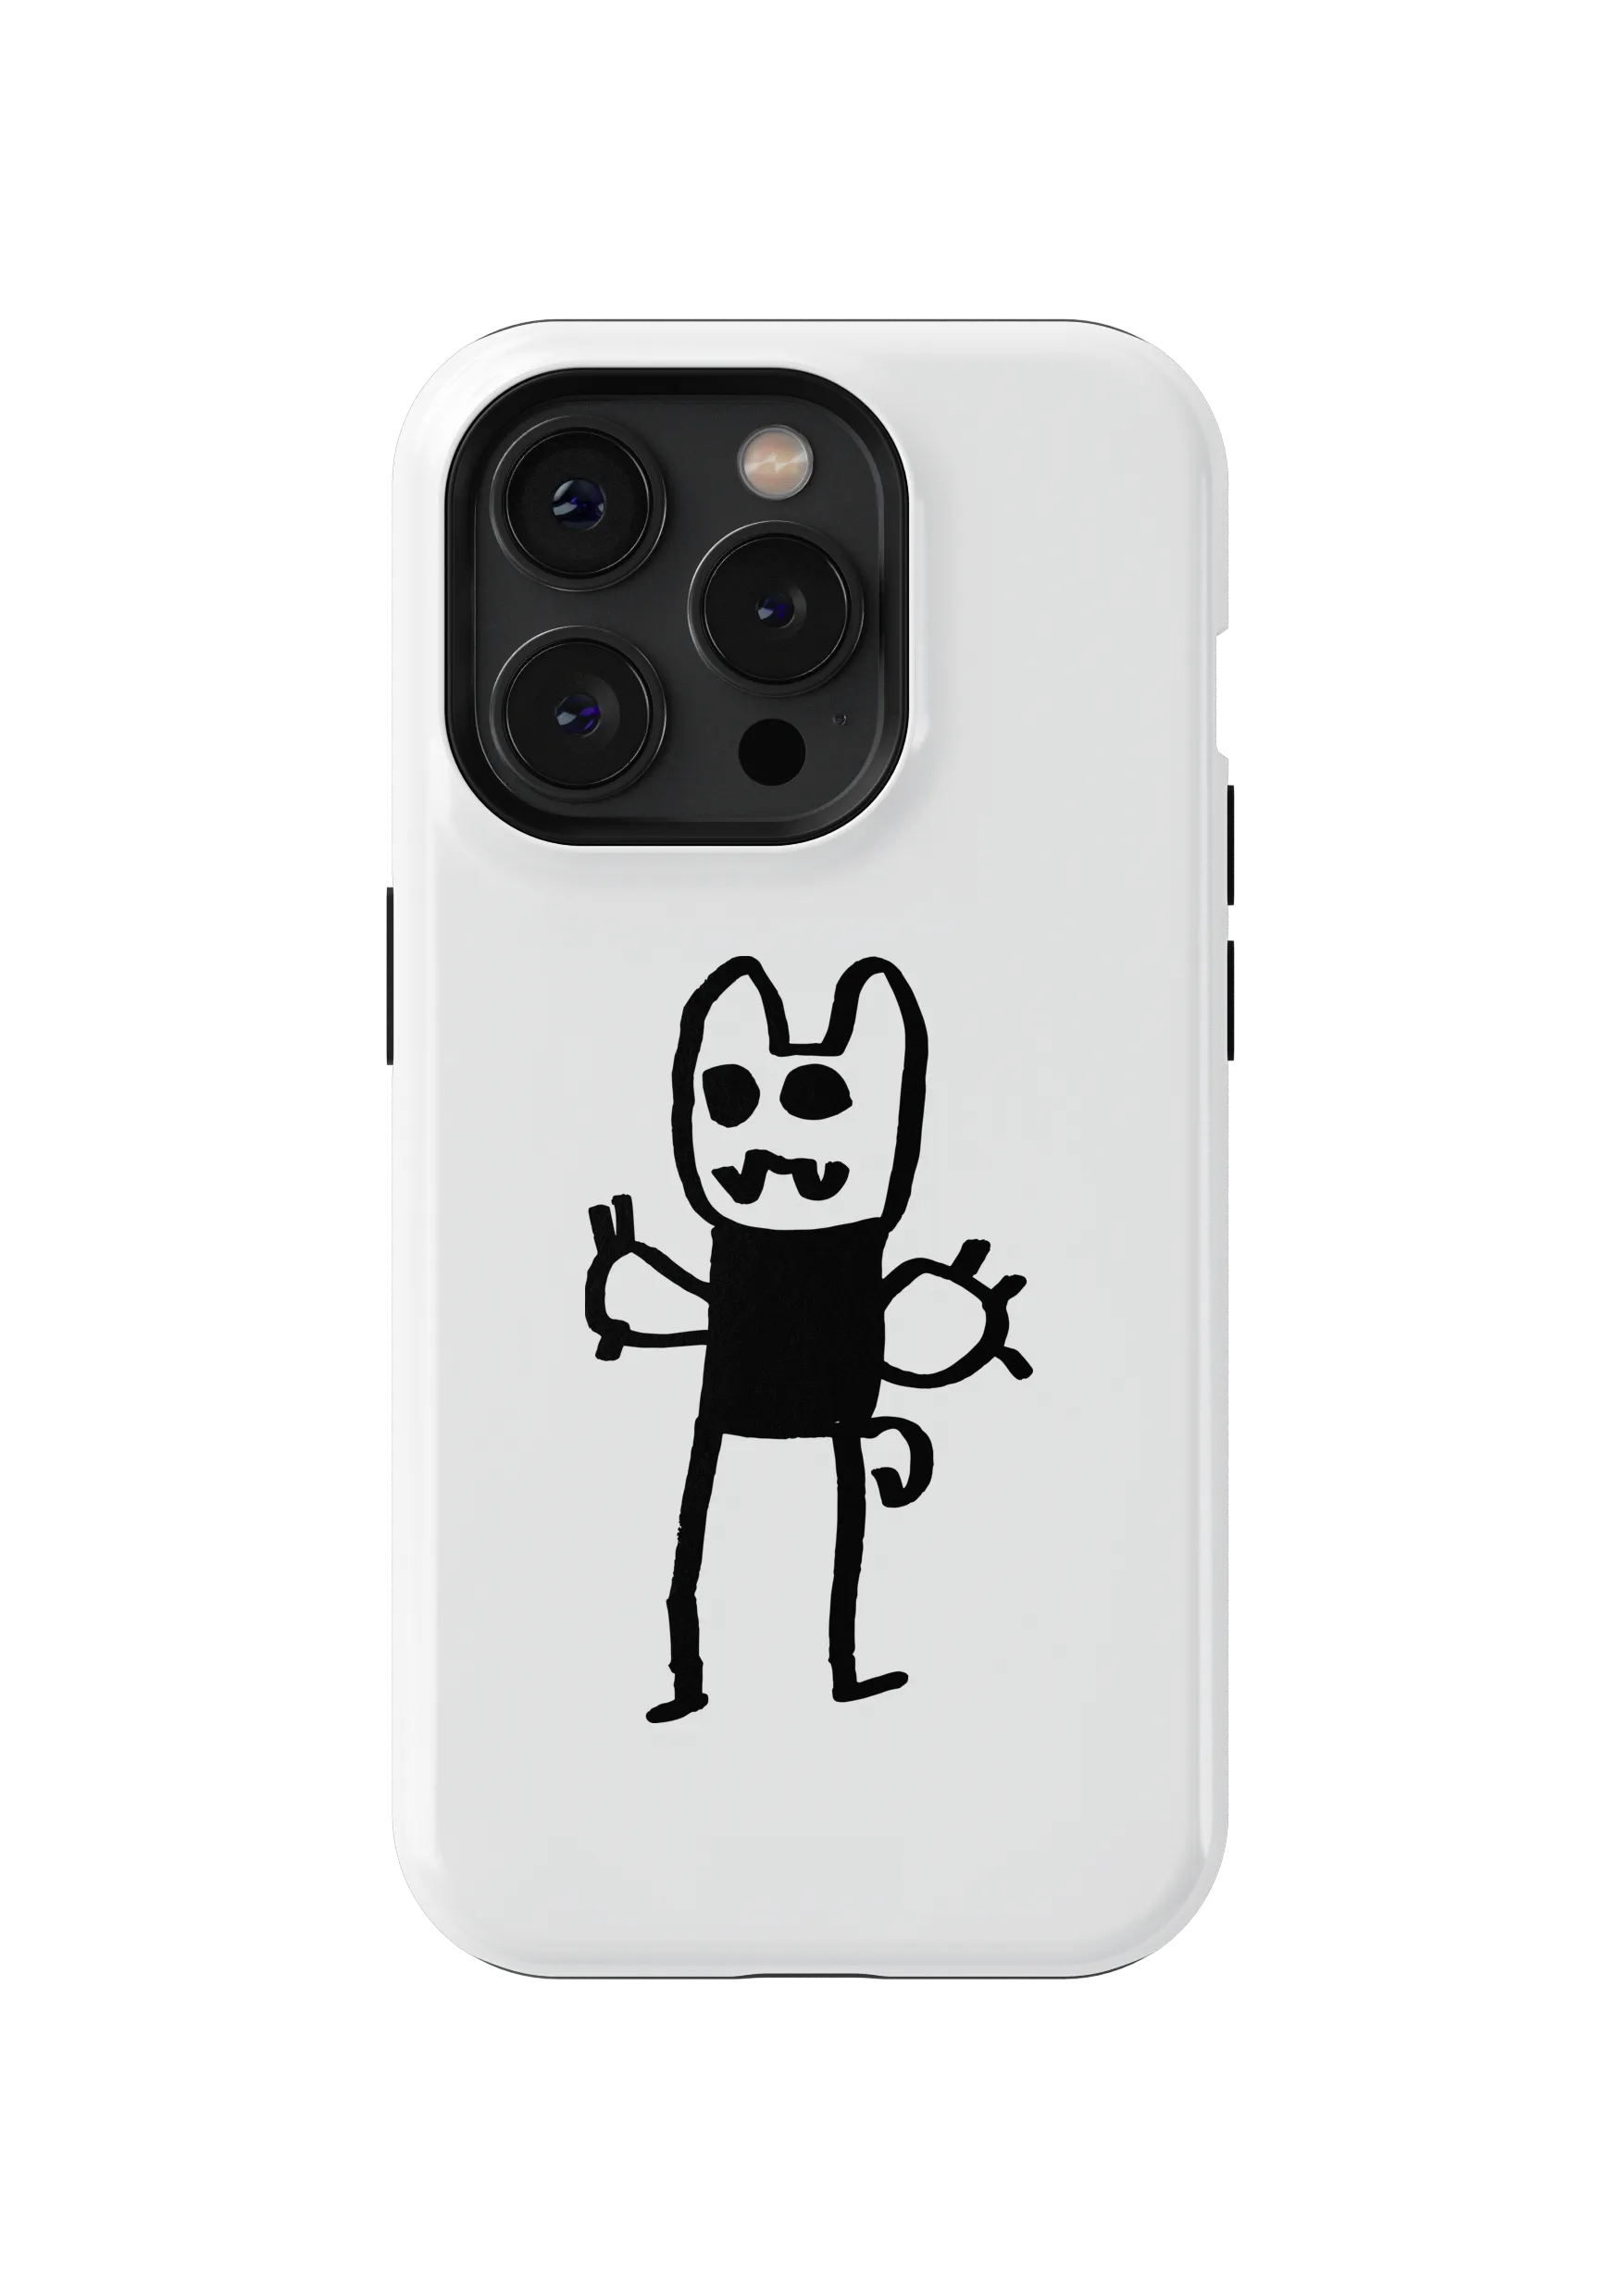 Jud drew a cat” graphic phone case by Josh Abe.